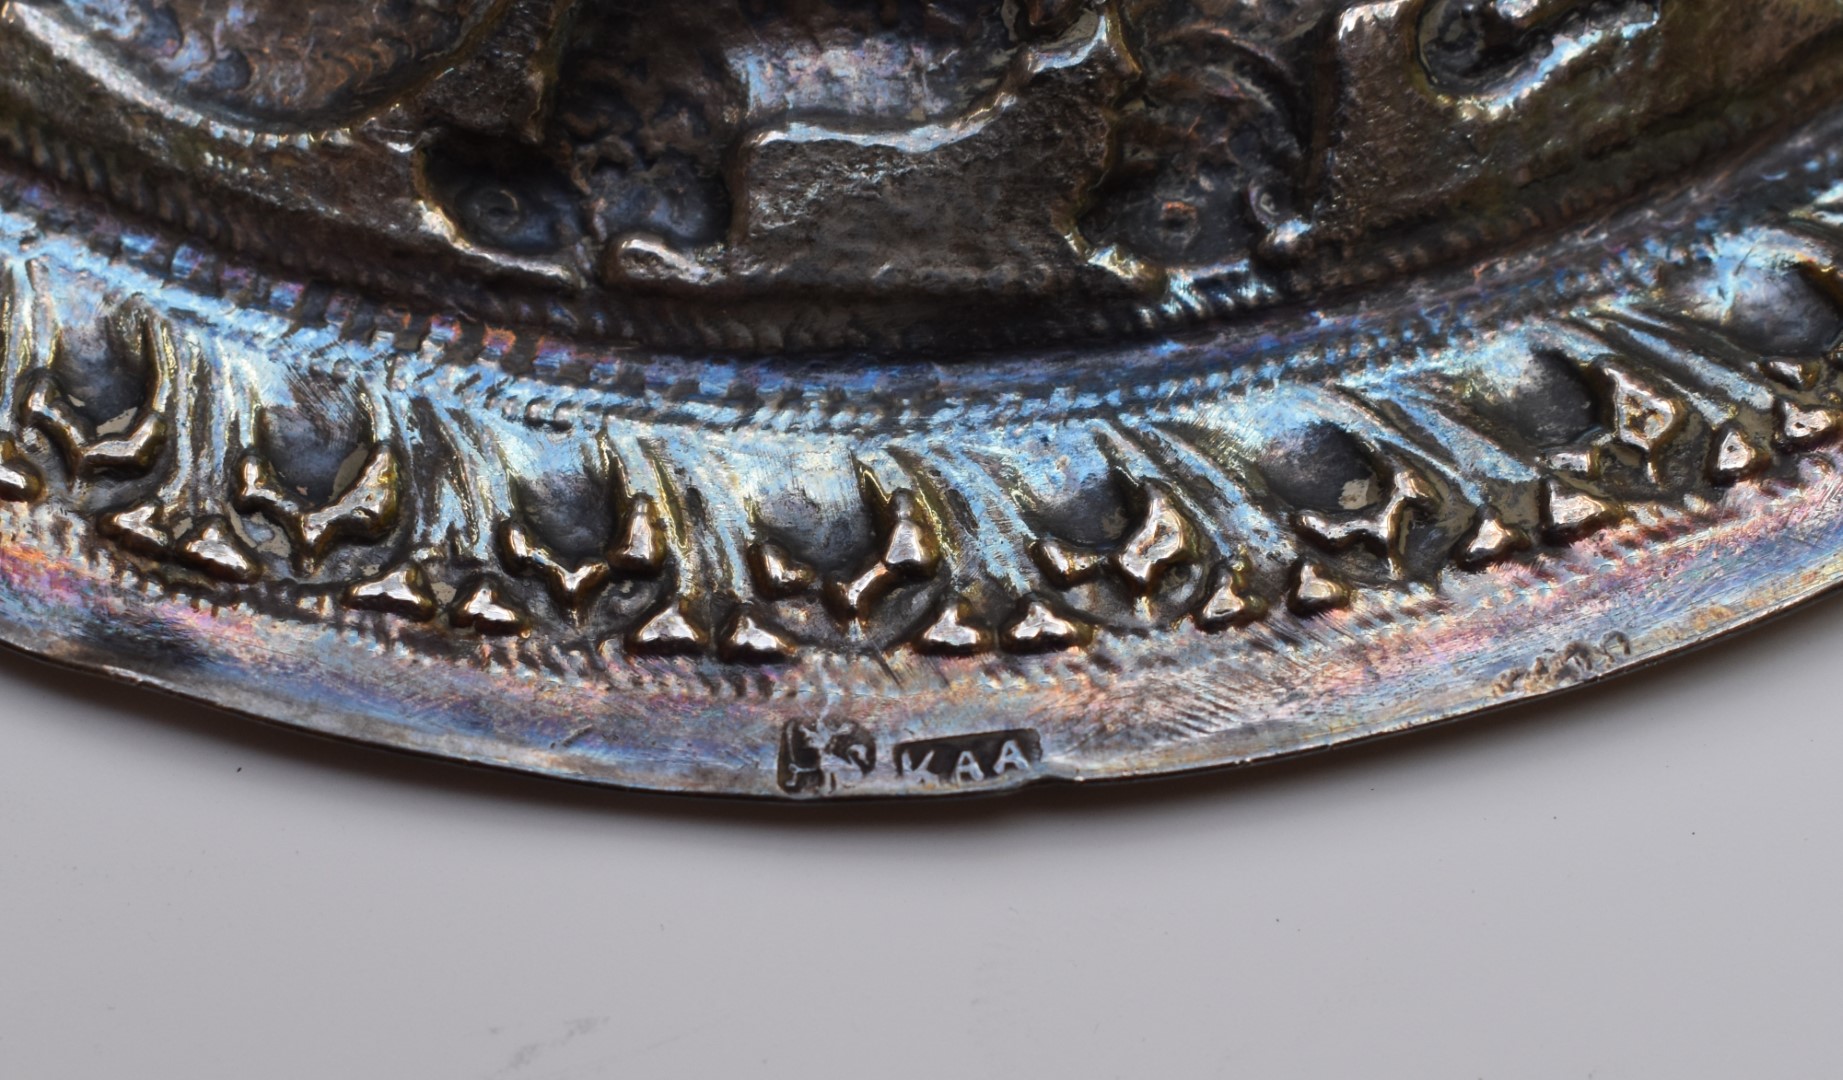 Sri Lanka white metal dish with embossed decoration of animals, marked KAA for Kandyan Arts - Image 3 of 3